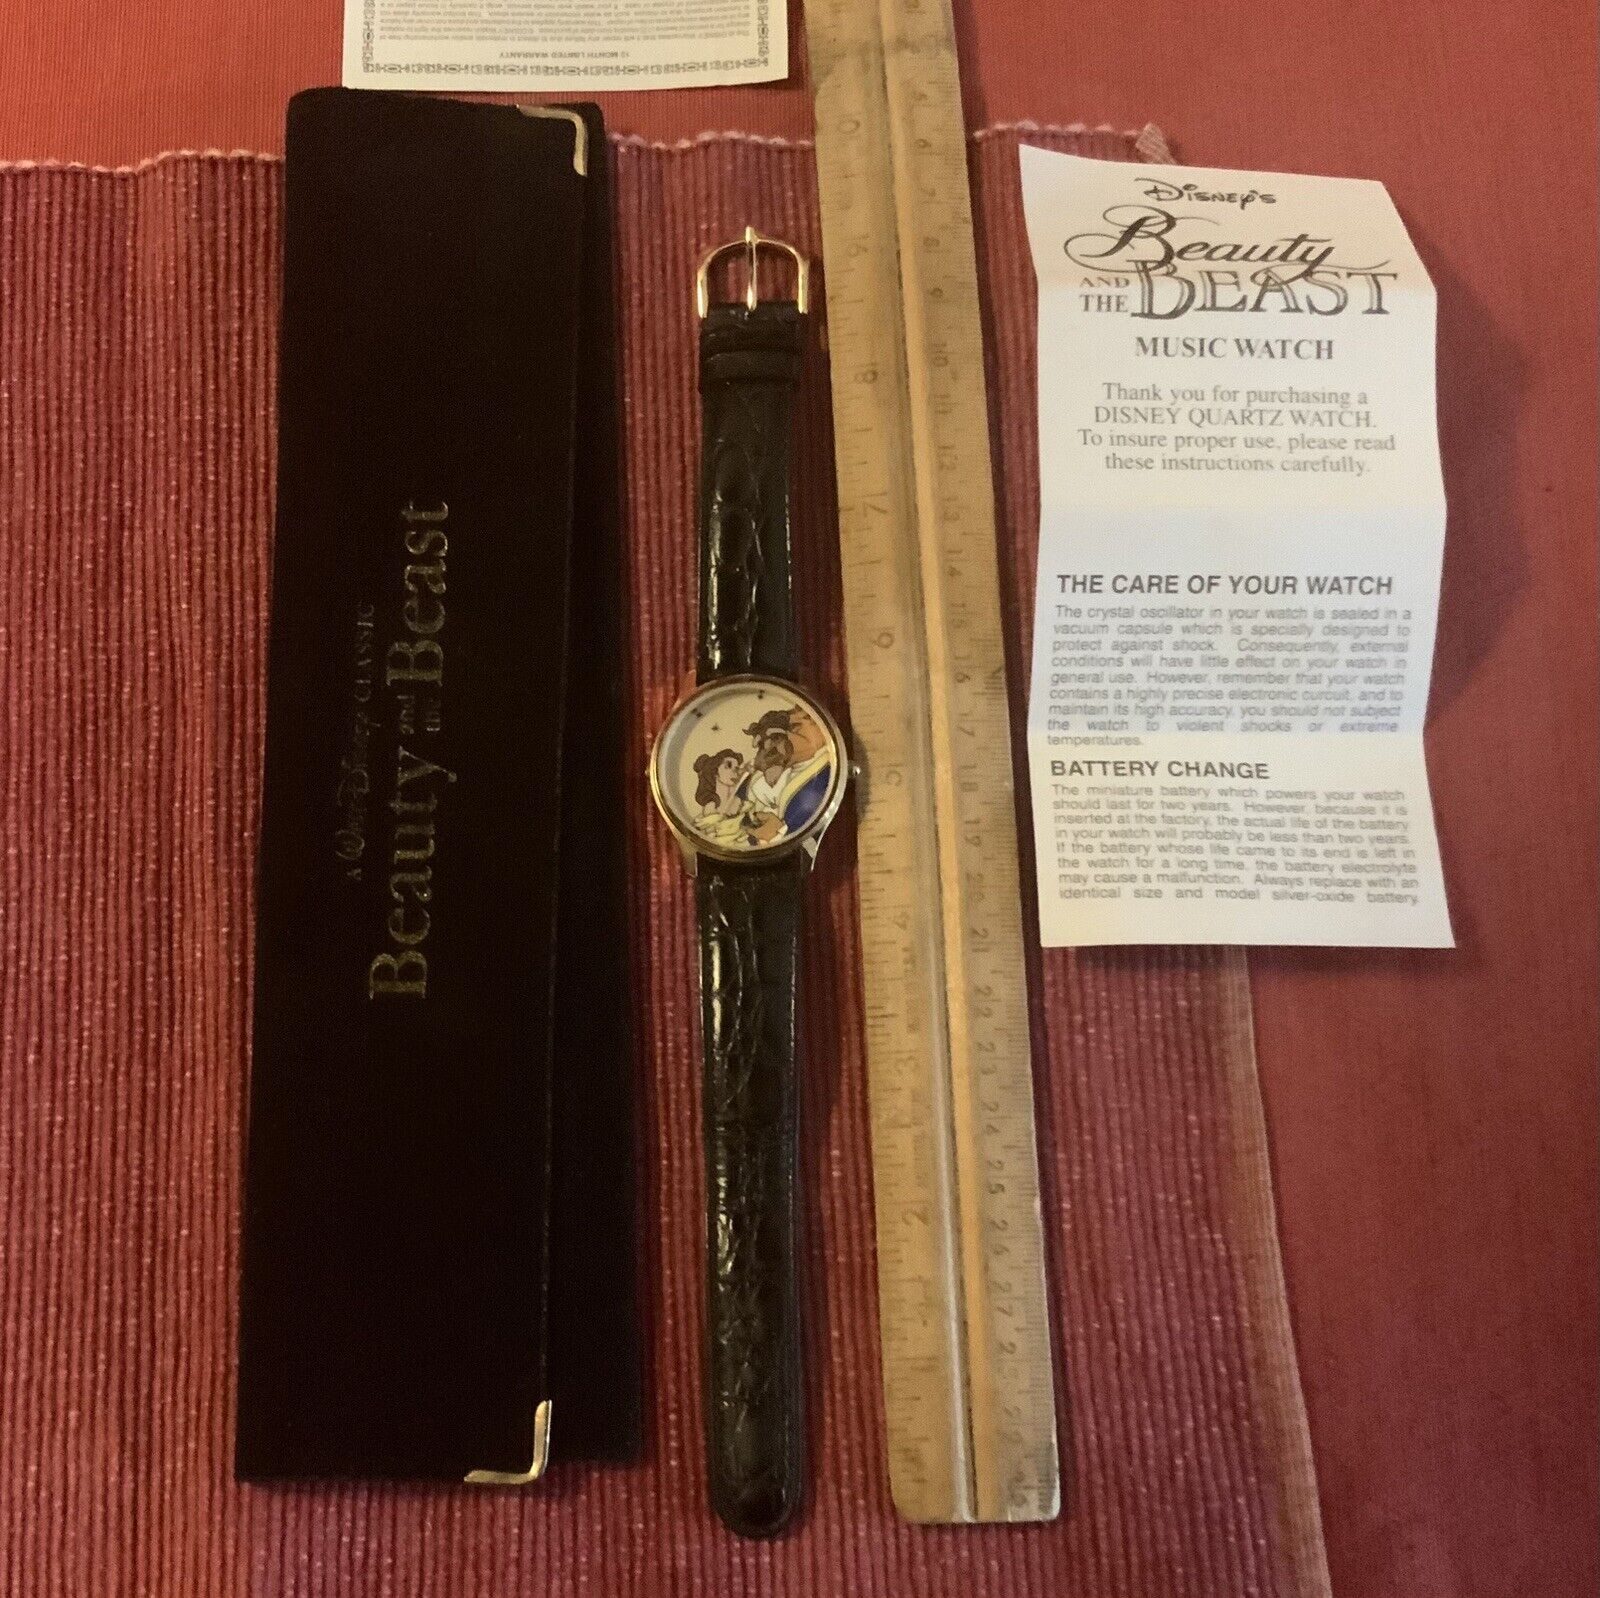 Vintage Disney Beauty and the Beast Music Watch Never Used/activated